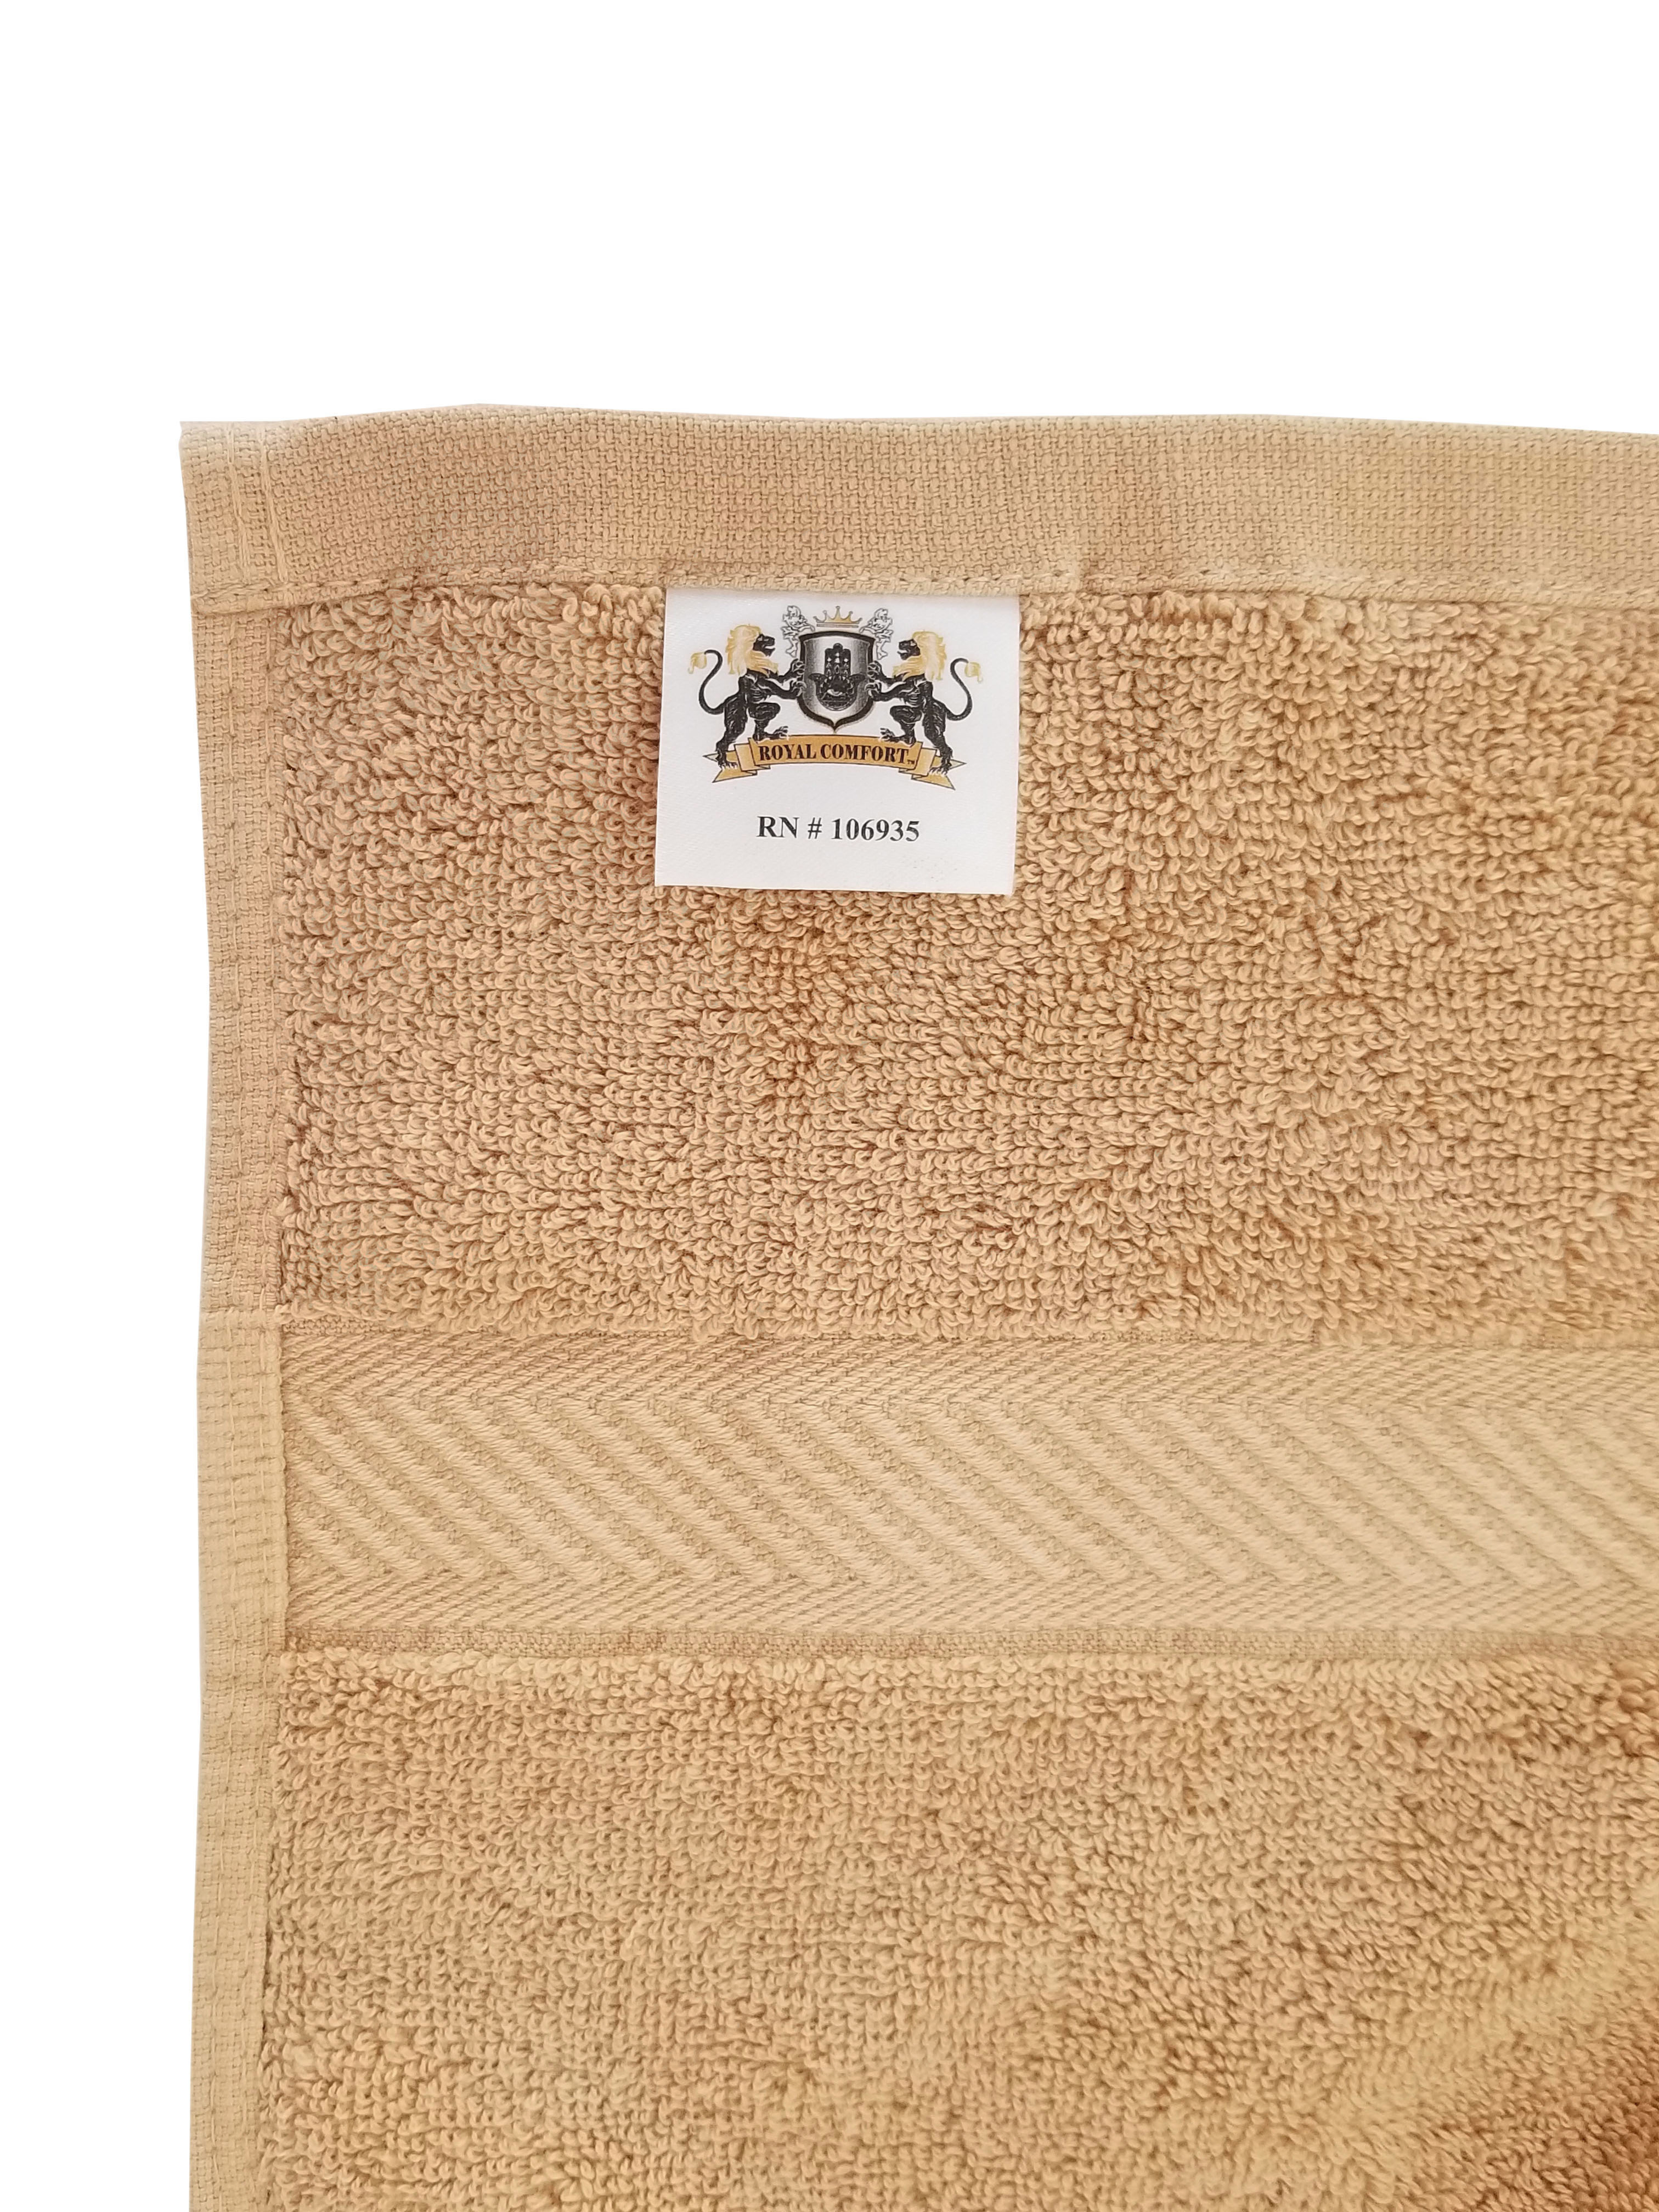 TowelsOutlet.com - 4 PC Set SHIPPING INCLUDED 27x54 Bath Towels by Royal Comfort Woven RING SPUN 